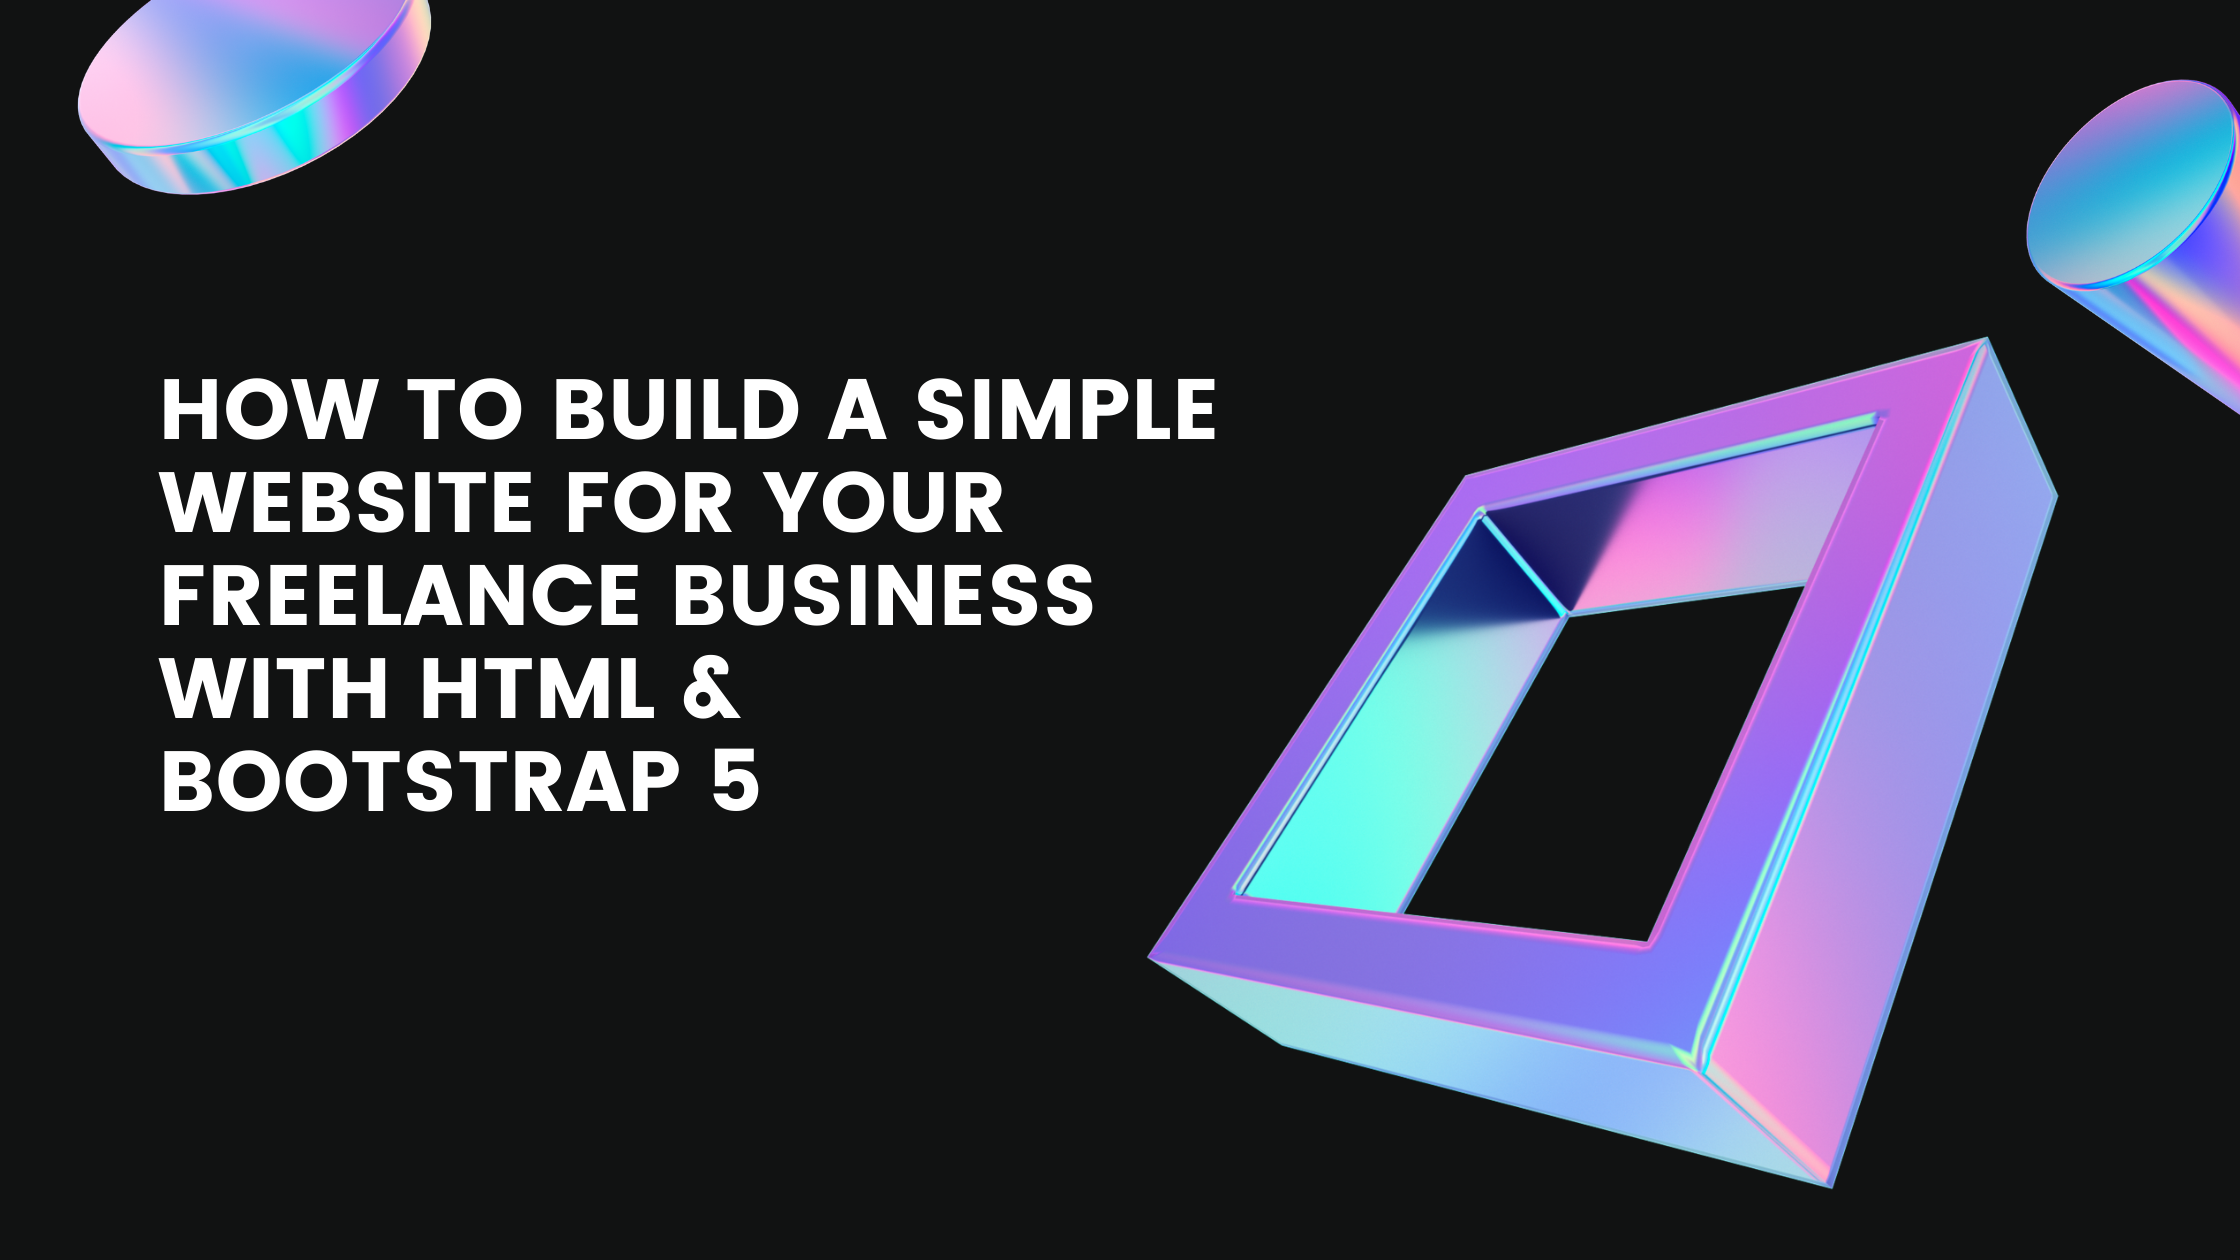 How to build a simple website for your freelance business using HTML and Bootstrap 5